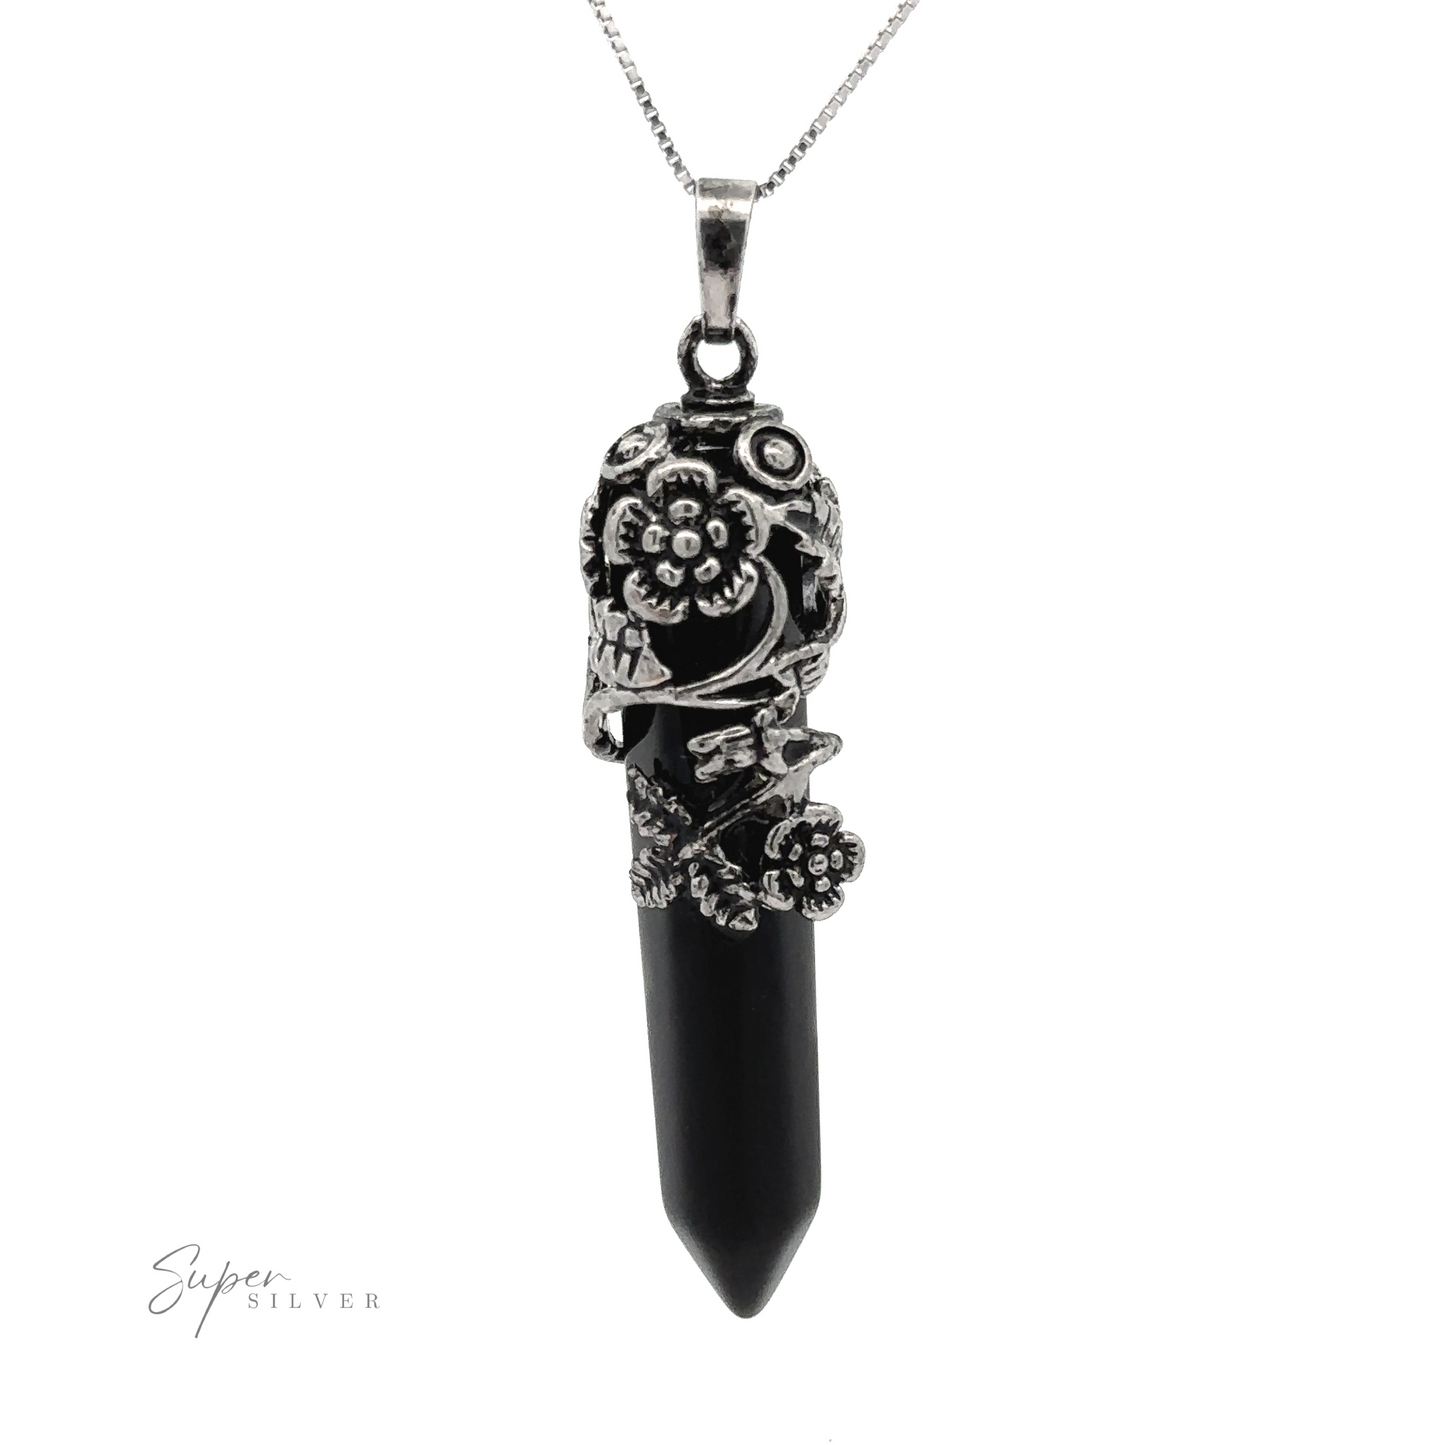 
                  
                    A Silver-Plated Flower Design Stone Pendant delicately cradles a black gemstone in a silver floral setting on a matching chain. The elongated, obelisk-shaped stone tapers to a point at the bottom. "Super Silver" is elegantly inscribed in the lower left corner.
                  
                